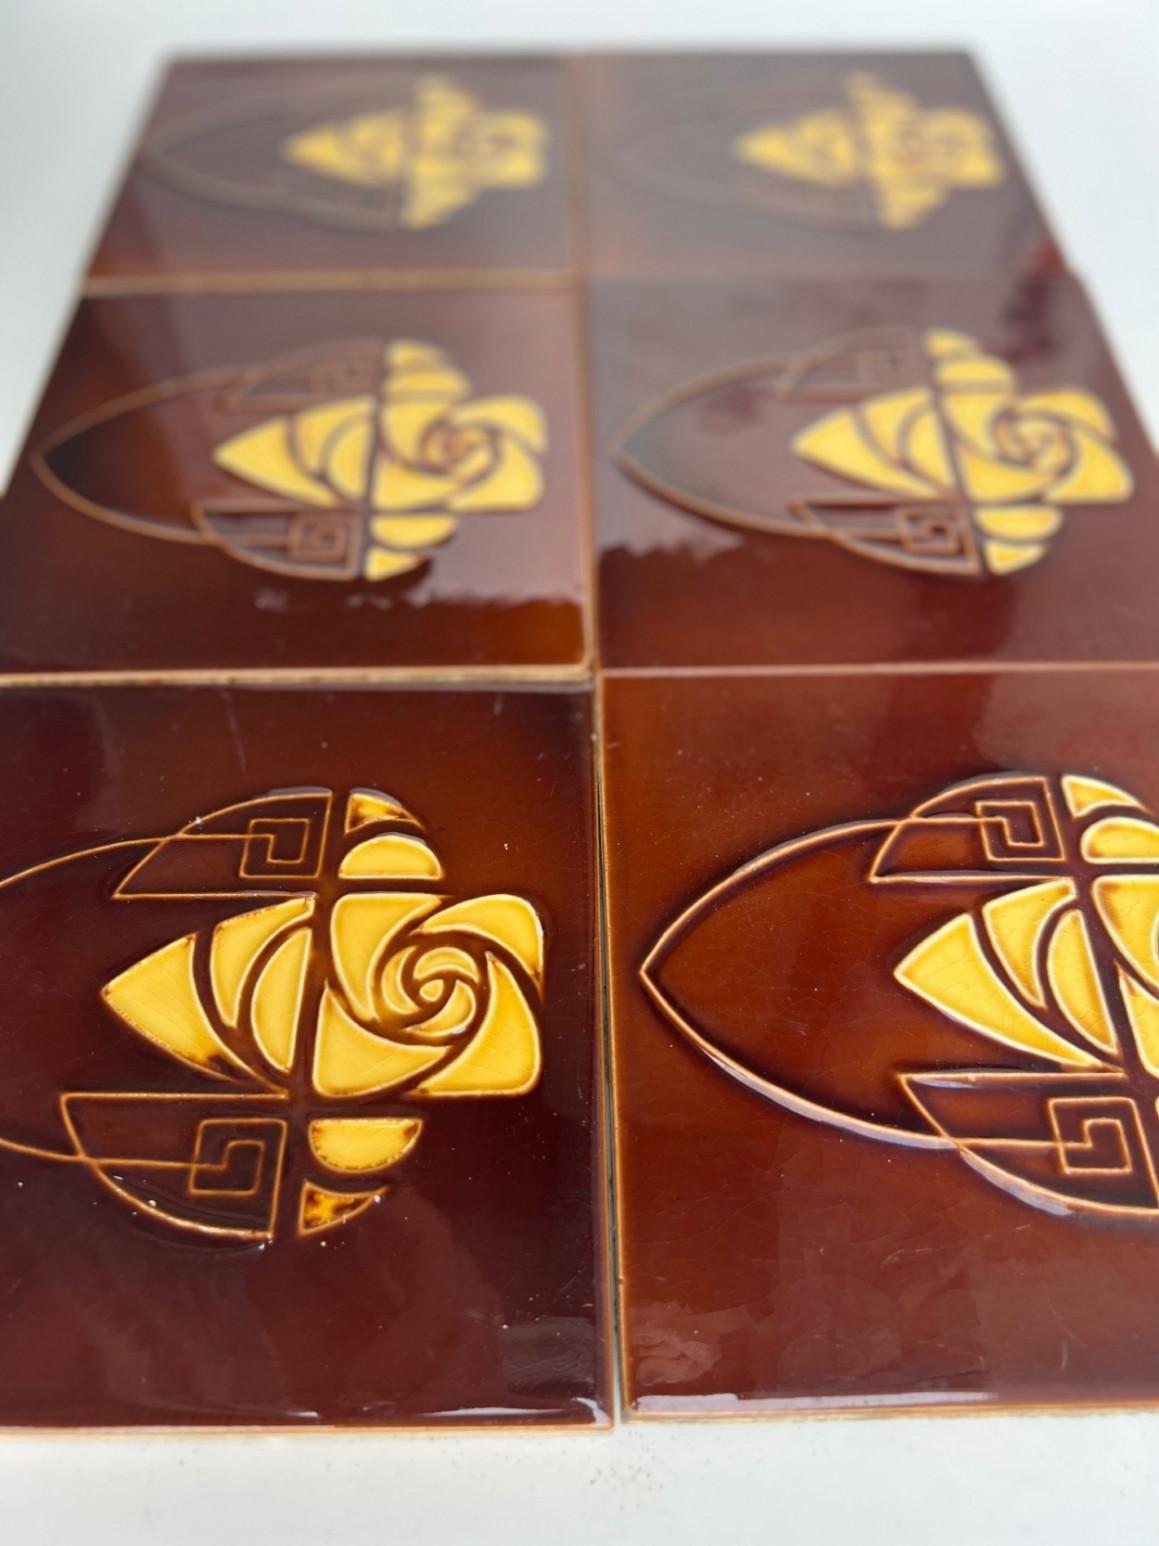 Brown and Yellow Art Nouveau Glazed Relief Tiles by Gilliot, Hemiksem, circa 192 For Sale 3